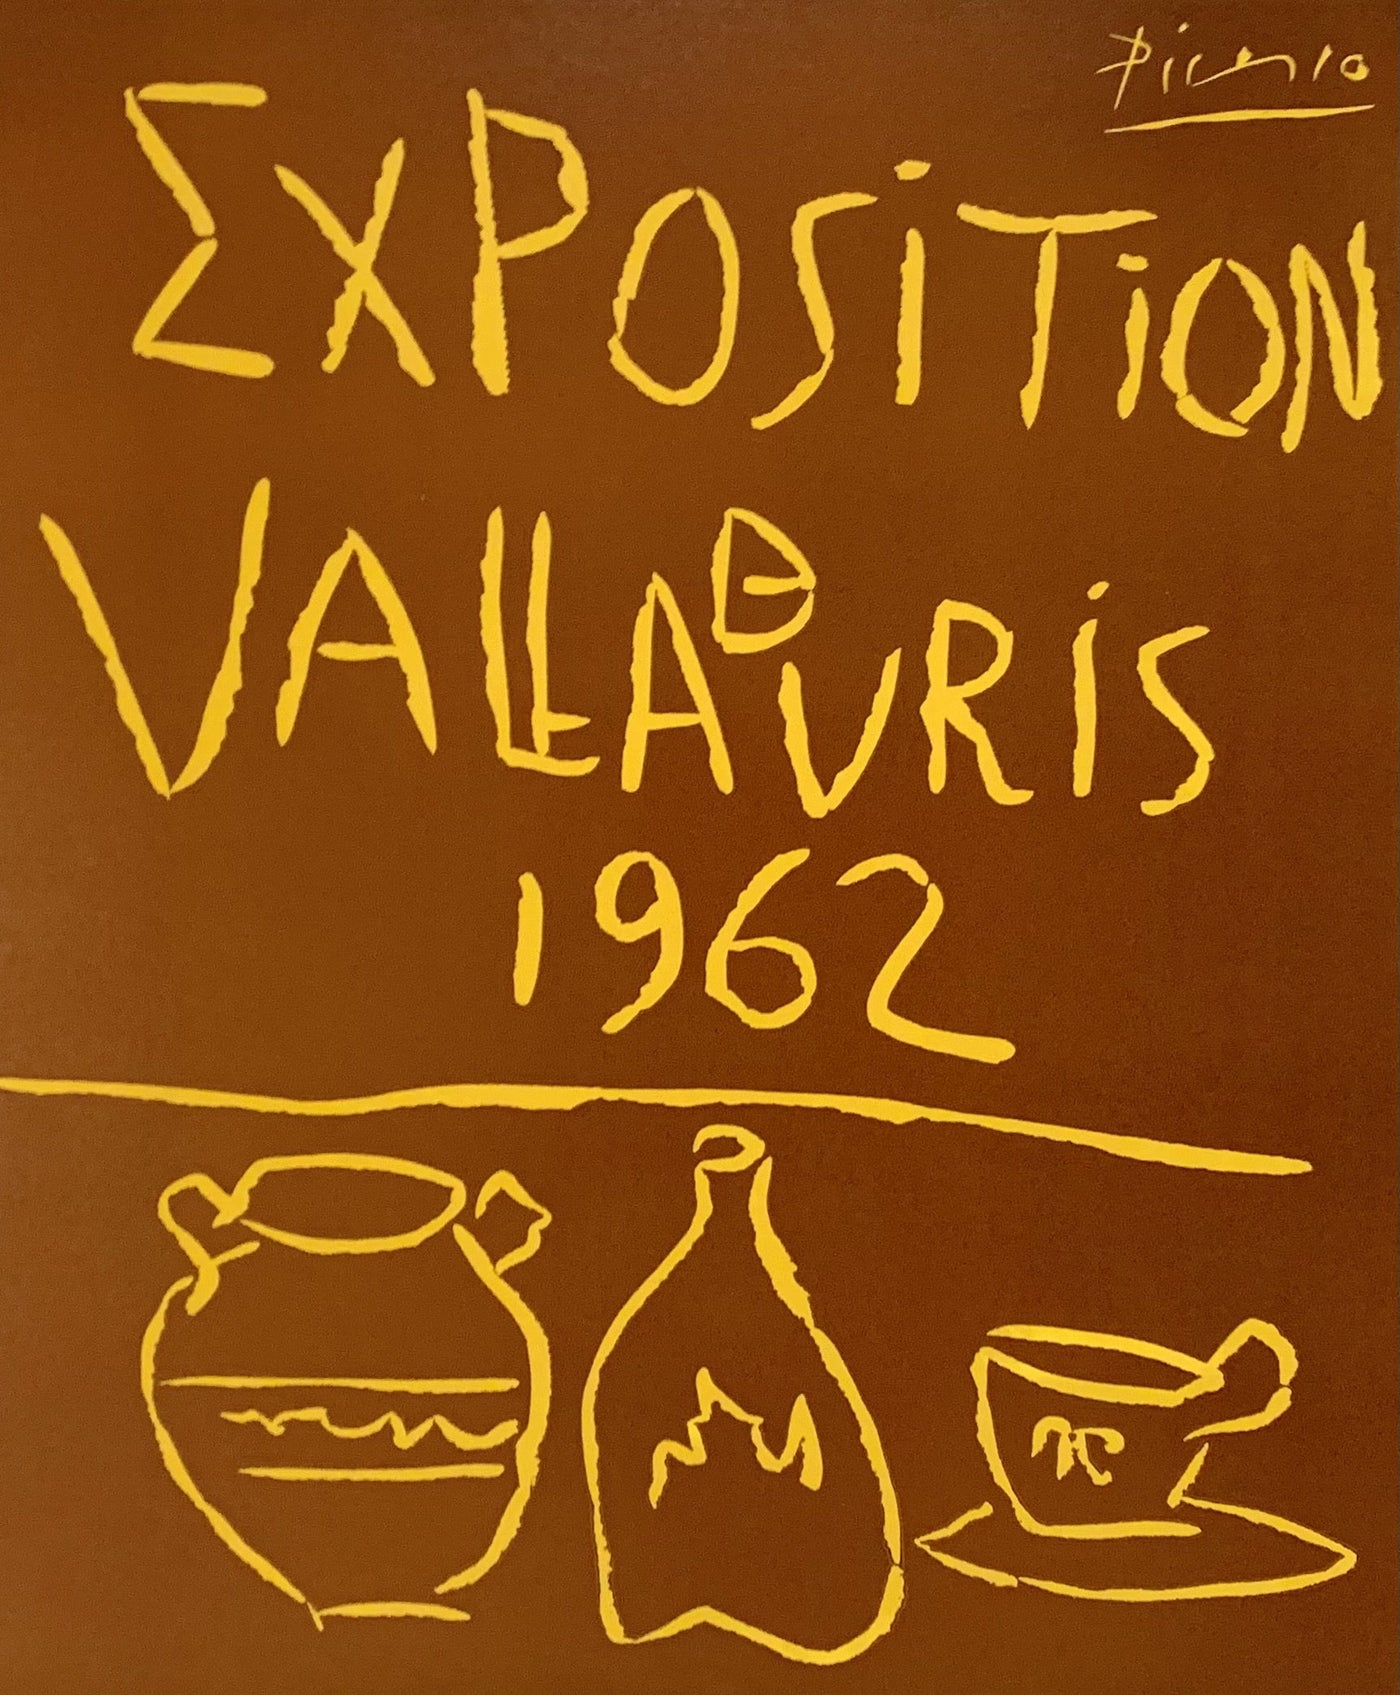 Pablo Picasso Exposition Vallauris 1962 (Czw 48) 1962